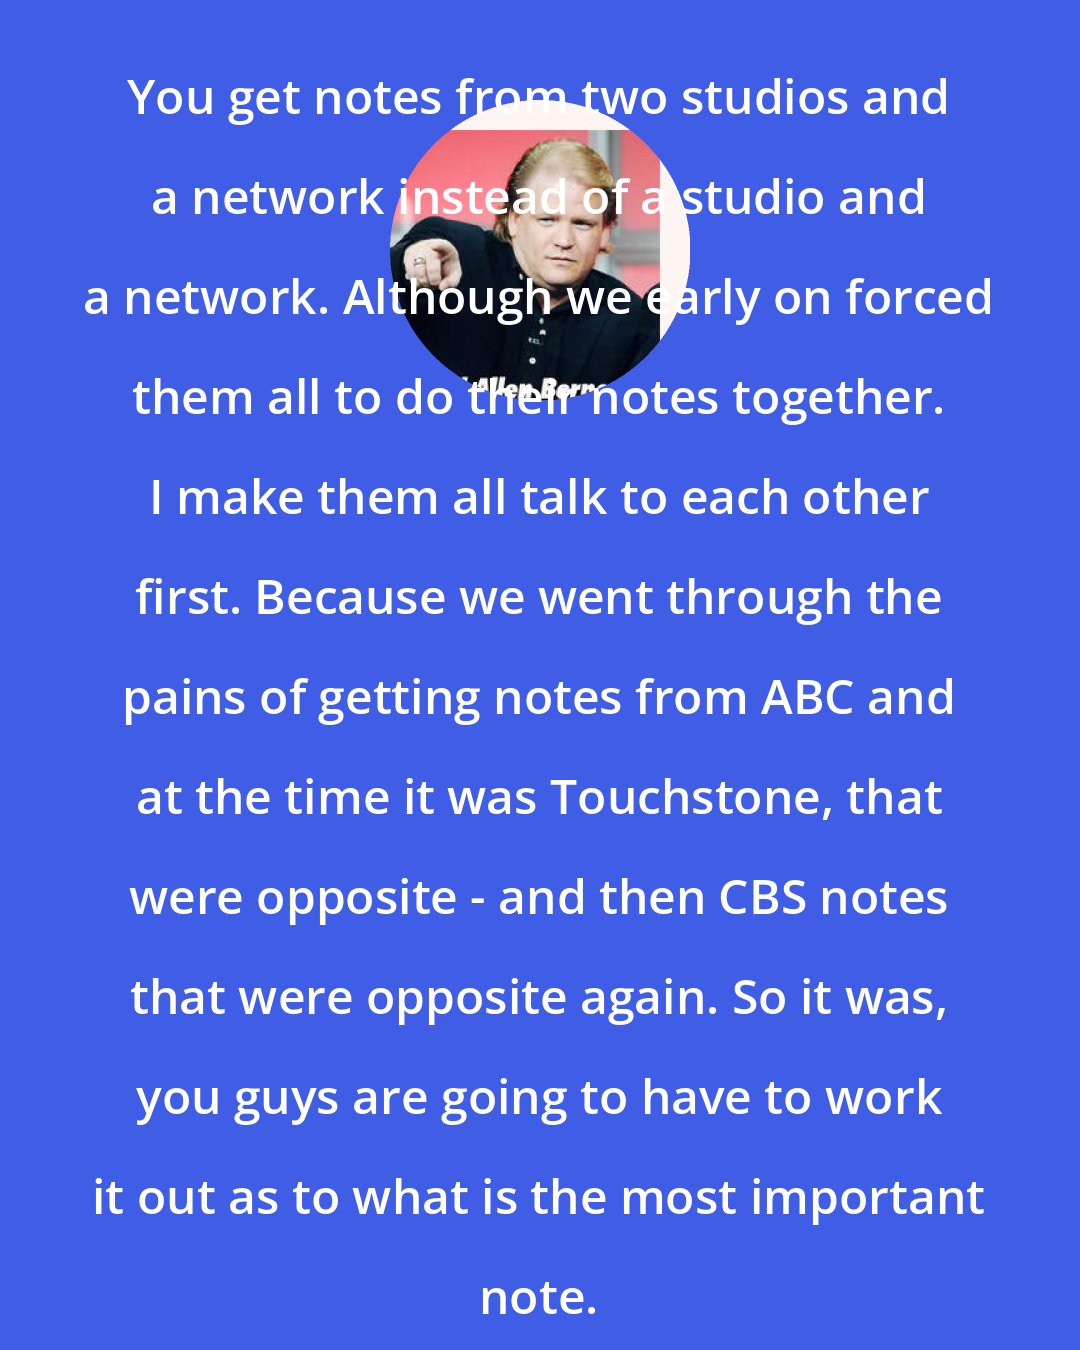 Edward Allen Bernero: You get notes from two studios and a network instead of a studio and a network. Although we early on forced them all to do their notes together. I make them all talk to each other first. Because we went through the pains of getting notes from ABC and at the time it was Touchstone, that were opposite - and then CBS notes that were opposite again. So it was, you guys are going to have to work it out as to what is the most important note.